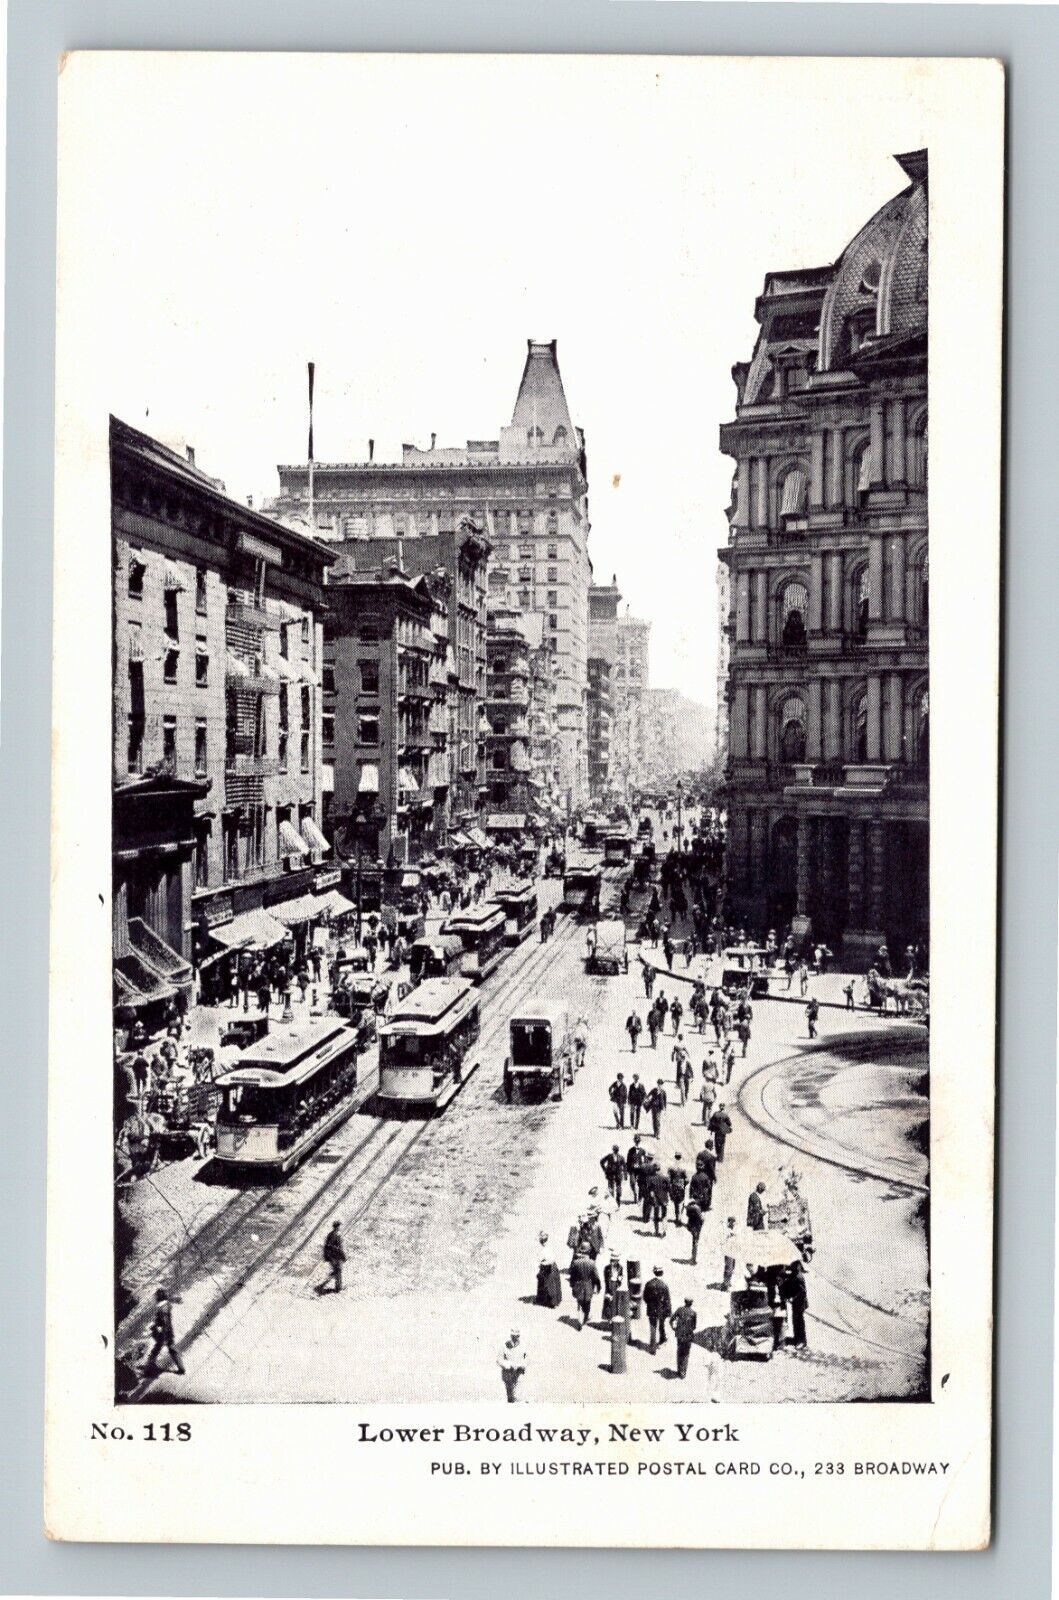 Lower Broadway, Trolley, Shoppers, Horse, Wagons, New York City Vintage Postcard